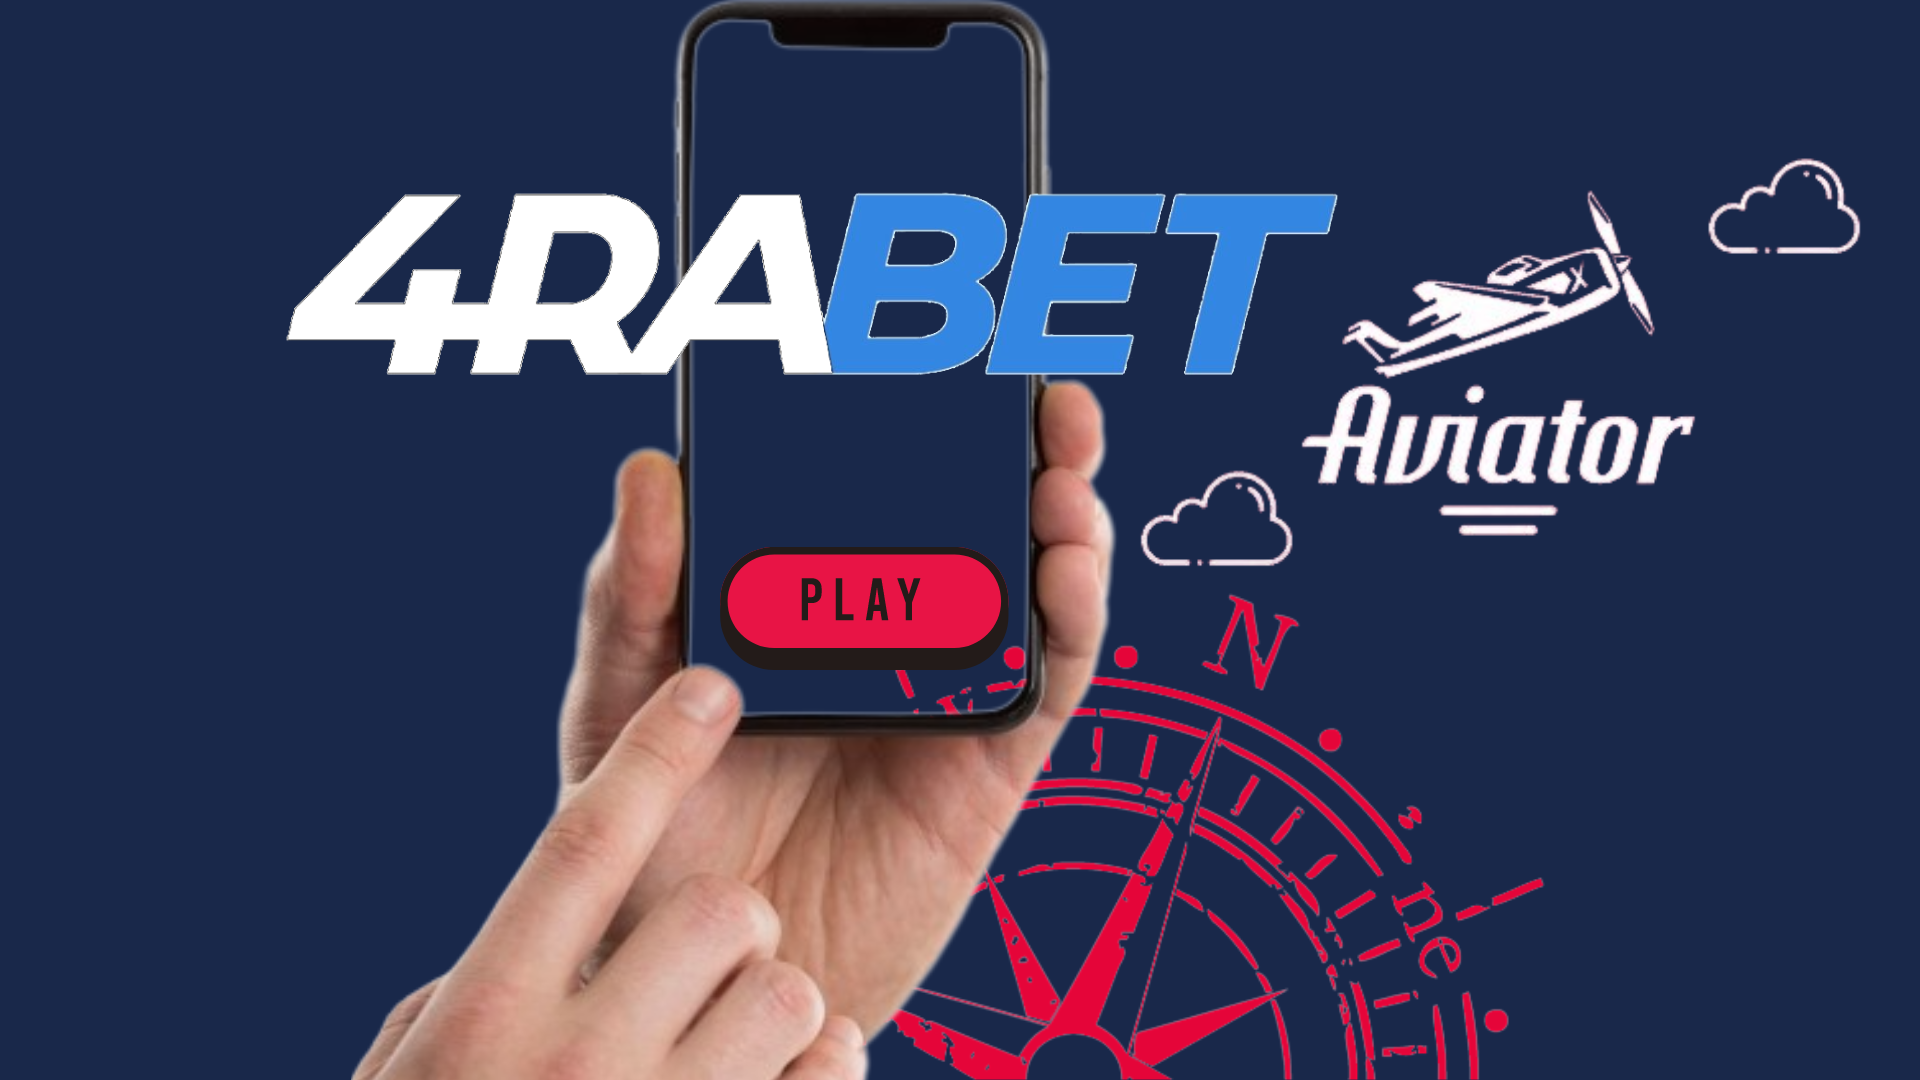 Logos of the Aviator game and 4rabet casino, and a hand holding smartphone